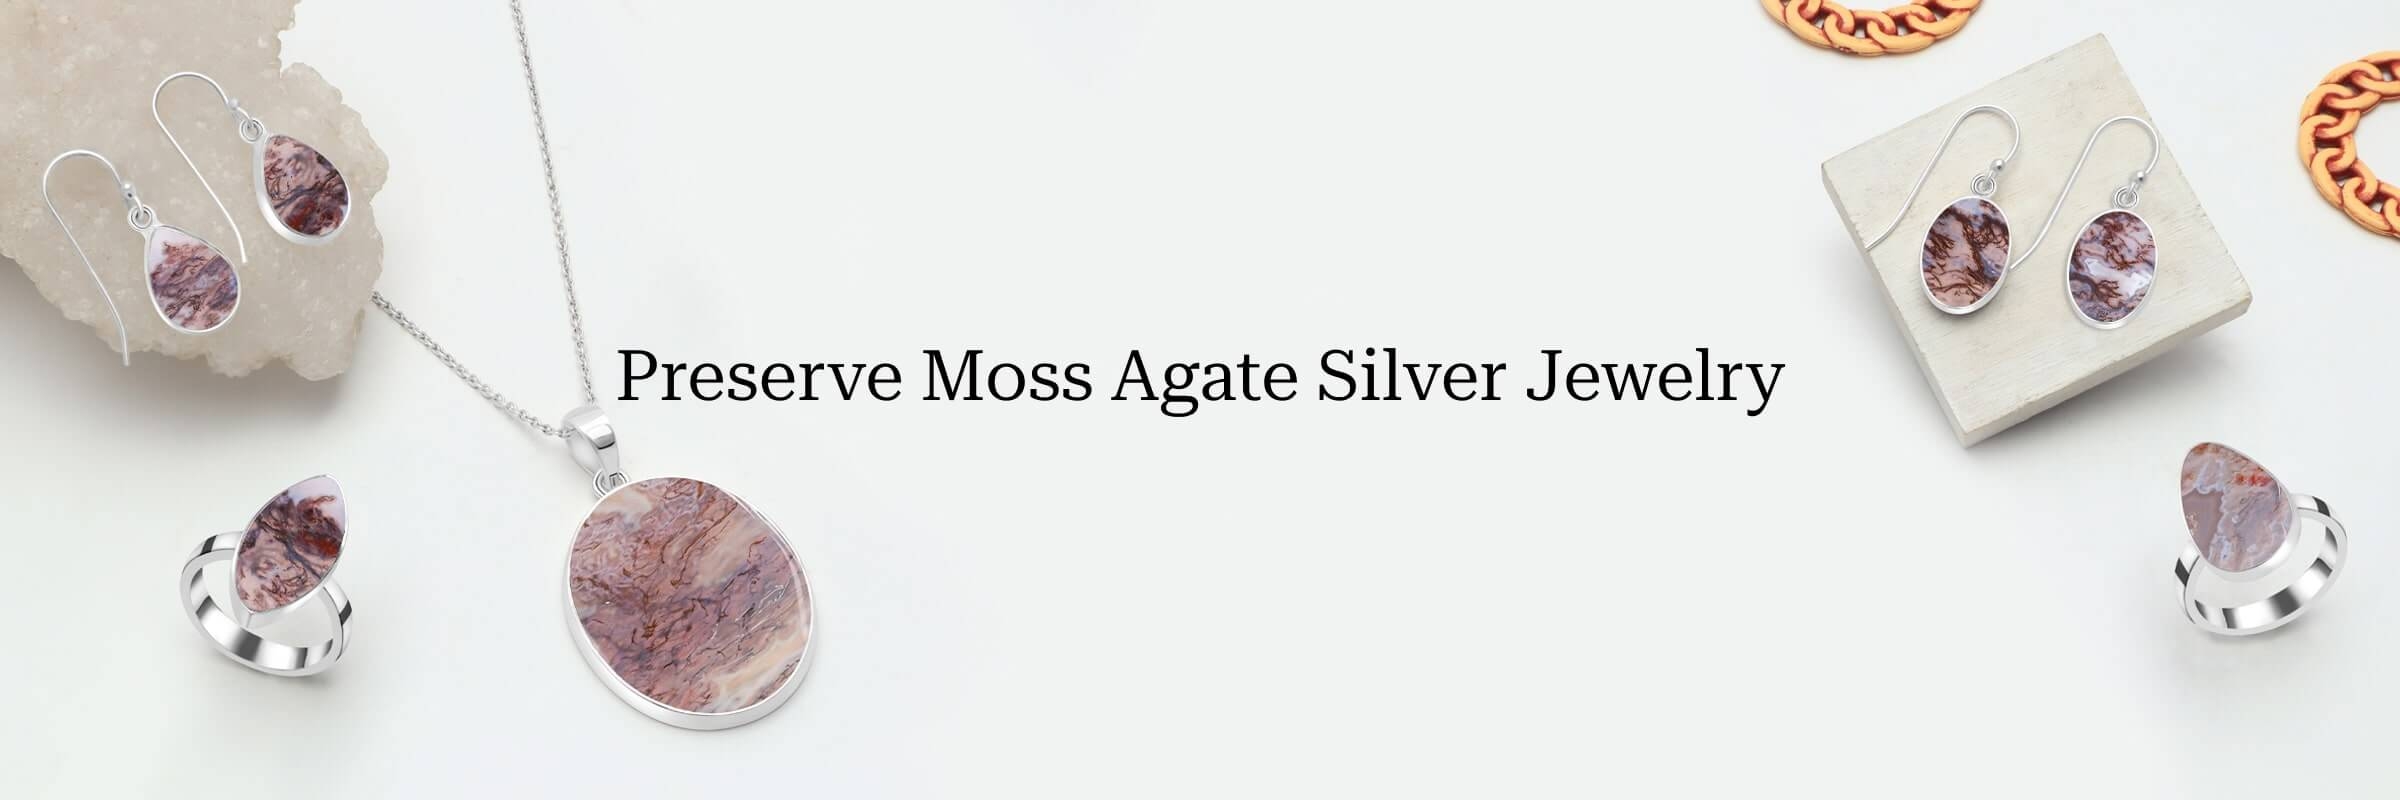 How to Care & Maintain The Moss Agate Plain Silver Jewelry